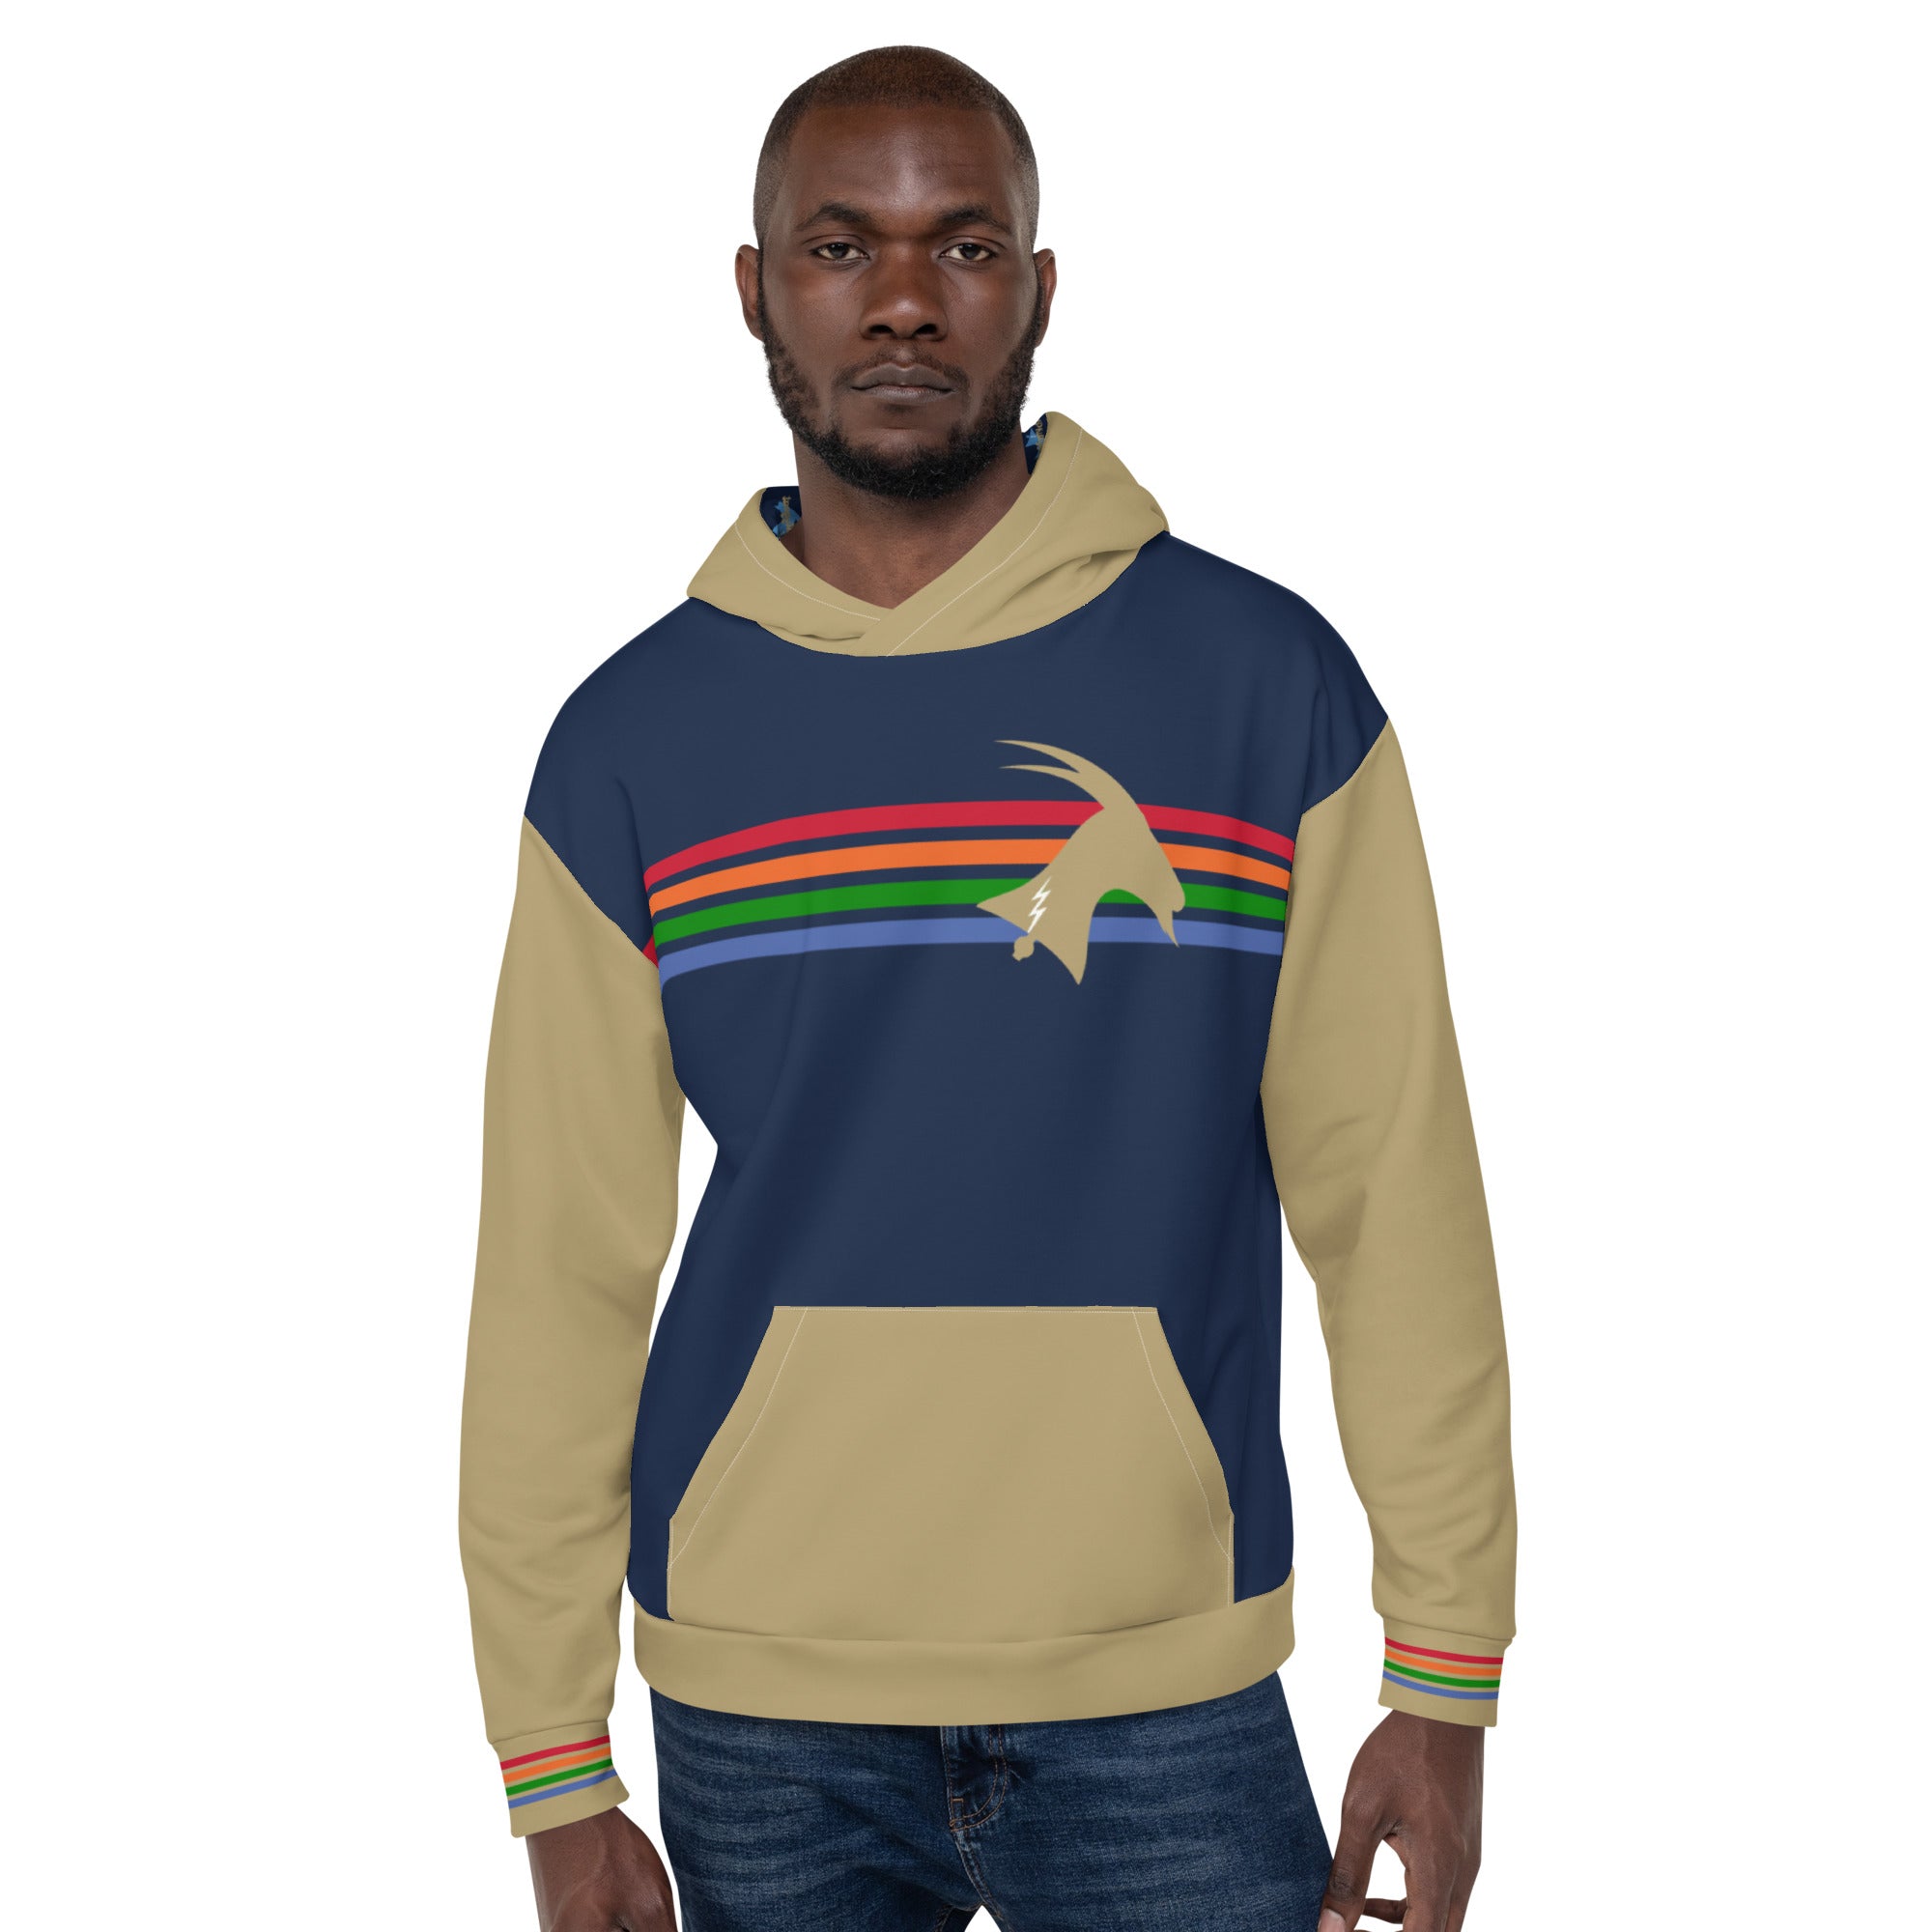 "Phillygoat Spectrum Vibes" All-Over Hoodie